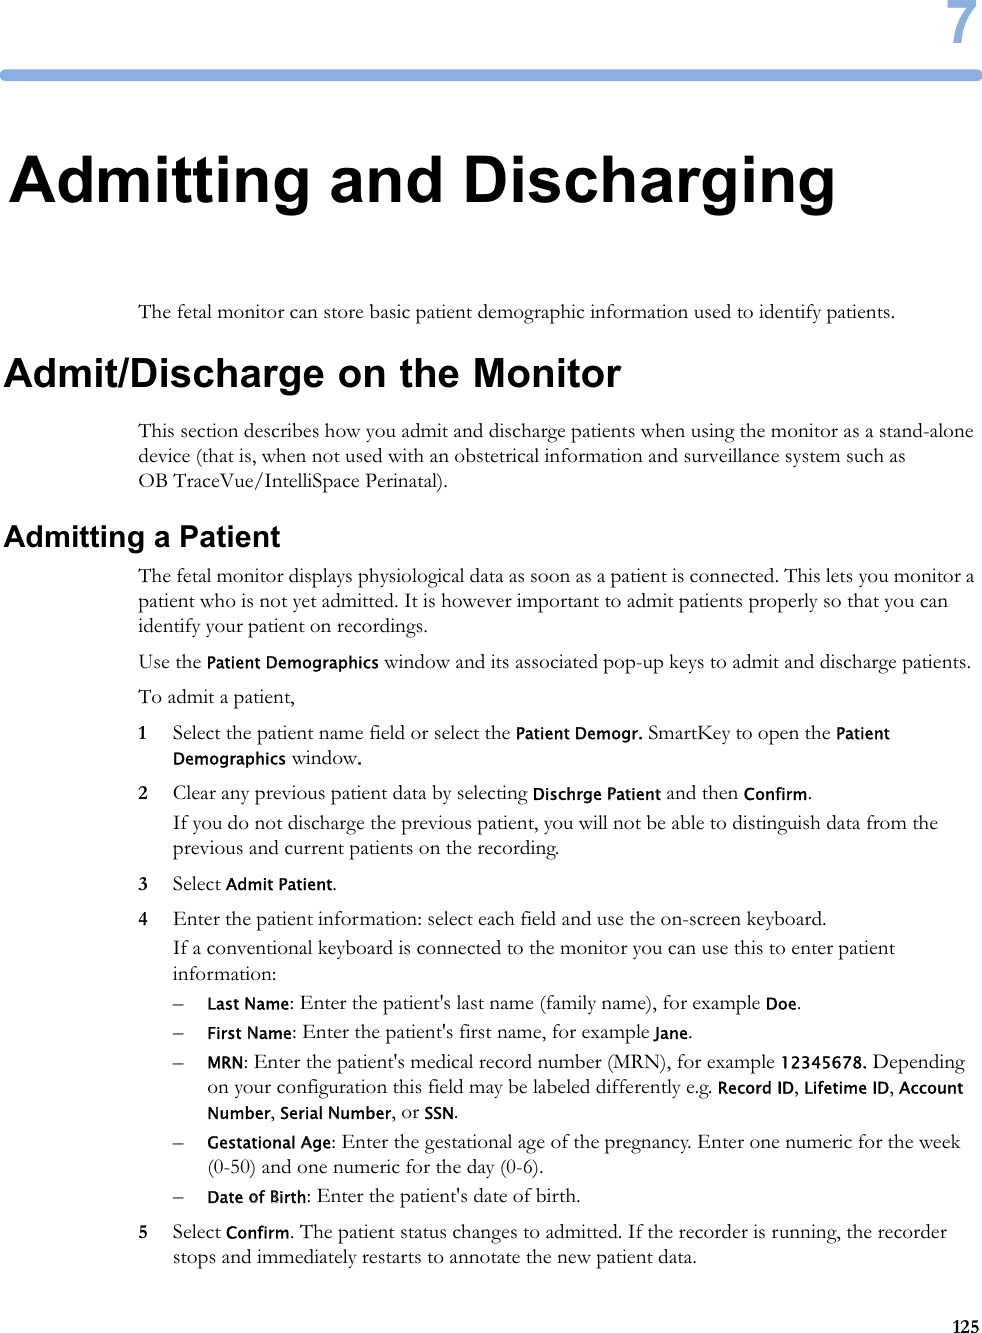 71257Admitting and DischargingThe fetal monitor can store basic patient demographic information used to identify patients.Admit/Discharge on the MonitorThis section describes how you admit and discharge patients when using the monitor as a stand-alone device (that is, when not used with an obstetrical information and surveillance system such as OB TraceVue/IntelliSpace Perinatal).Admitting a PatientThe fetal monitor displays physiological data as soon as a patient is connected. This lets you monitor a patient who is not yet admitted. It is however important to admit patients properly so that you can identify your patient on recordings.Use the Patient Demographics window and its associated pop-up keys to admit and discharge patients.To admit a patient,1Select the patient name field or select the Patient Demogr. SmartKey to open the Patient Demographics window.2Clear any previous patient data by selecting Dischrge Patient and then Confirm.If you do not discharge the previous patient, you will not be able to distinguish data from the previous and current patients on the recording.3Select Admit Patient.4Enter the patient information: select each field and use the on-screen keyboard.If a conventional keyboard is connected to the monitor you can use this to enter patient information:–Last Name: Enter the patient&apos;s last name (family name), for example Doe.–First Name: Enter the patient&apos;s first name, for example Jane.–MRN: Enter the patient&apos;s medical record number (MRN), for example 12345678. Depending on your configuration this field may be labeled differently e.g. Record ID, Lifetime ID, Account Number, Serial Number, or SSN.–Gestational Age: Enter the gestational age of the pregnancy. Enter one numeric for the week (0-50) and one numeric for the day (0-6).–Date of Birth: Enter the patient&apos;s date of birth.5Select Confirm. The patient status changes to admitted. If the recorder is running, the recorder stops and immediately restarts to annotate the new patient data.